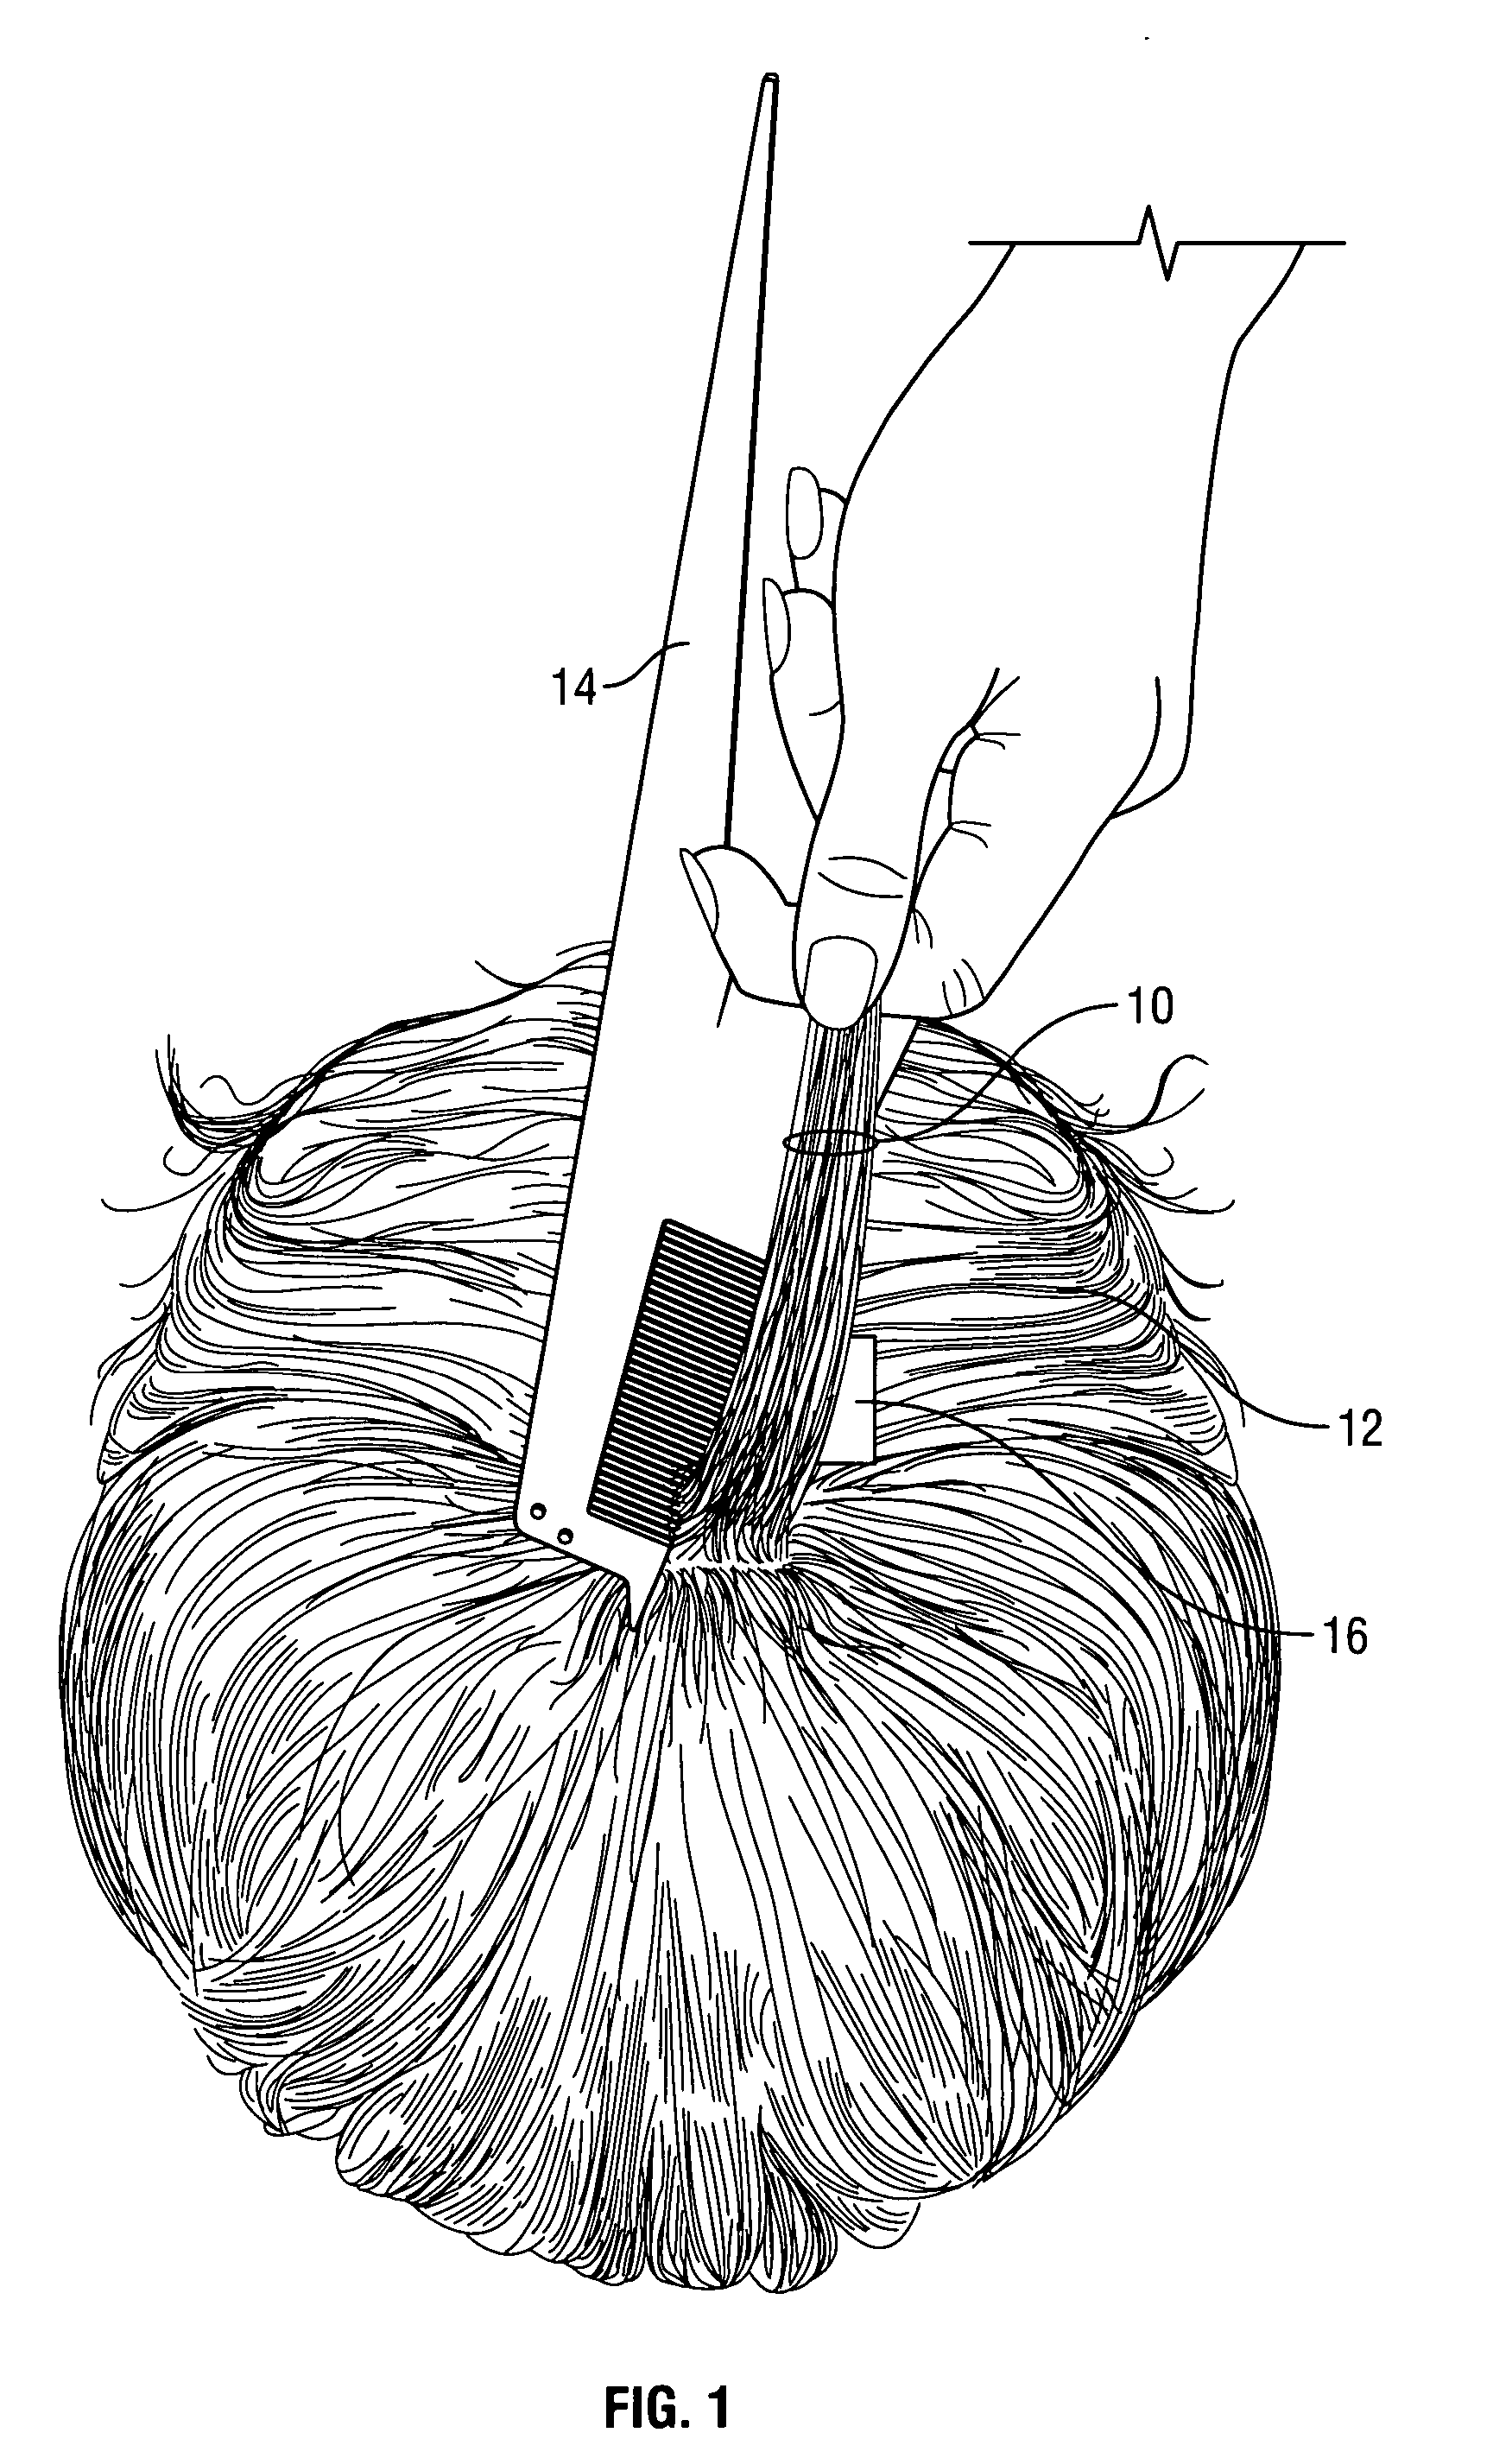 Method and device for measuring fluctuations in the cross-sectional area of hair in a pre-determined scalp area